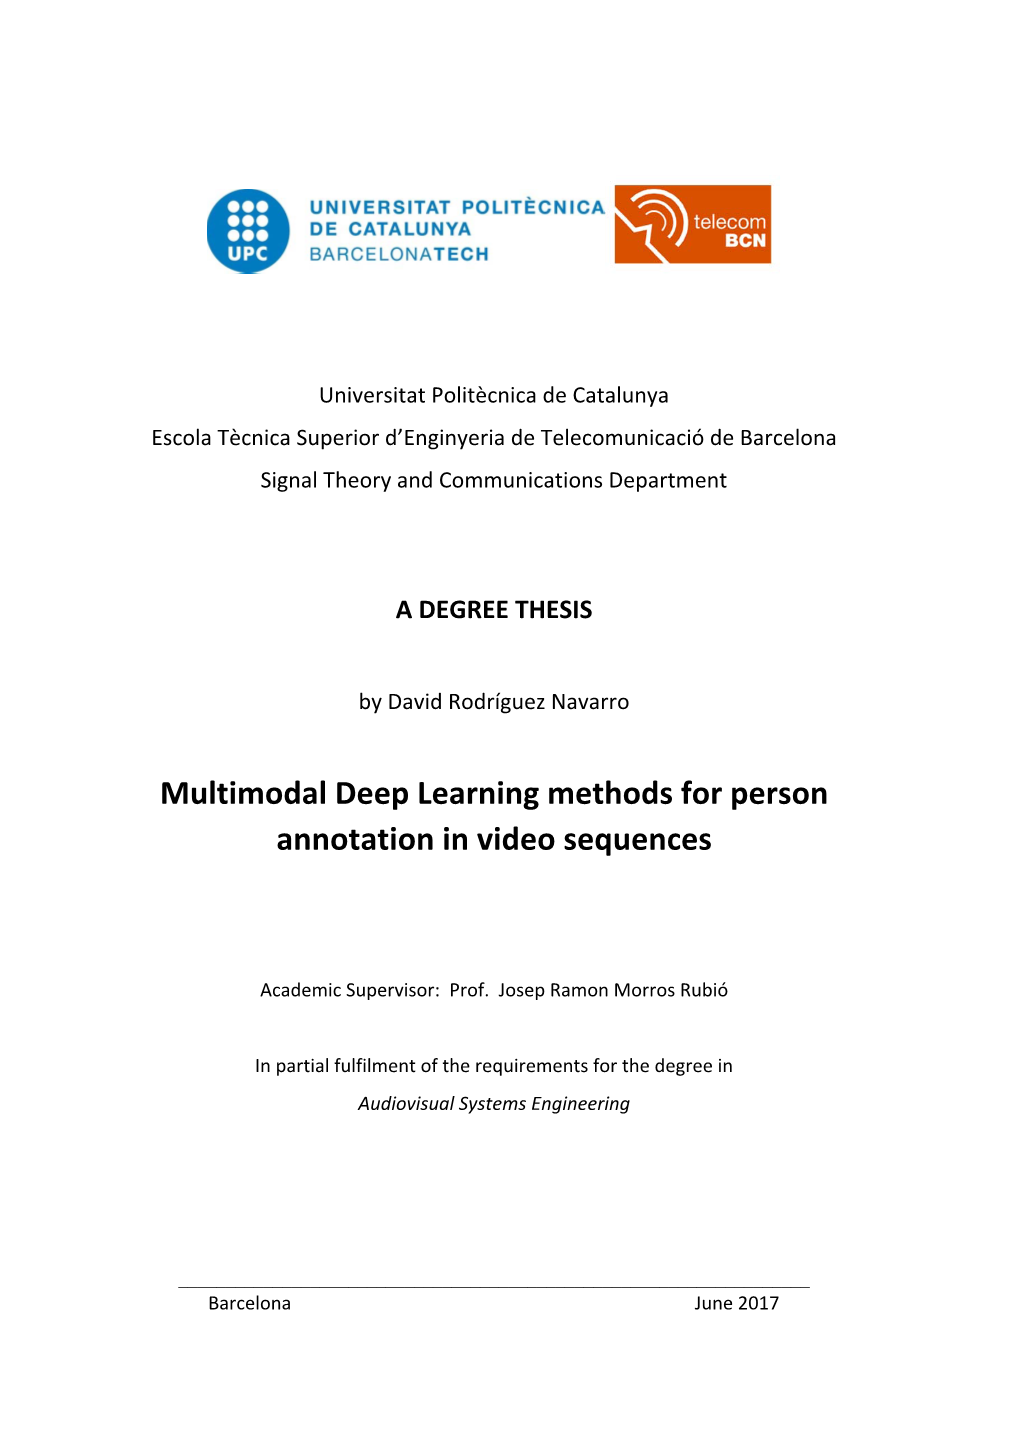 Multimodal Deep Learning Methods for Person Annotation in Video Sequences